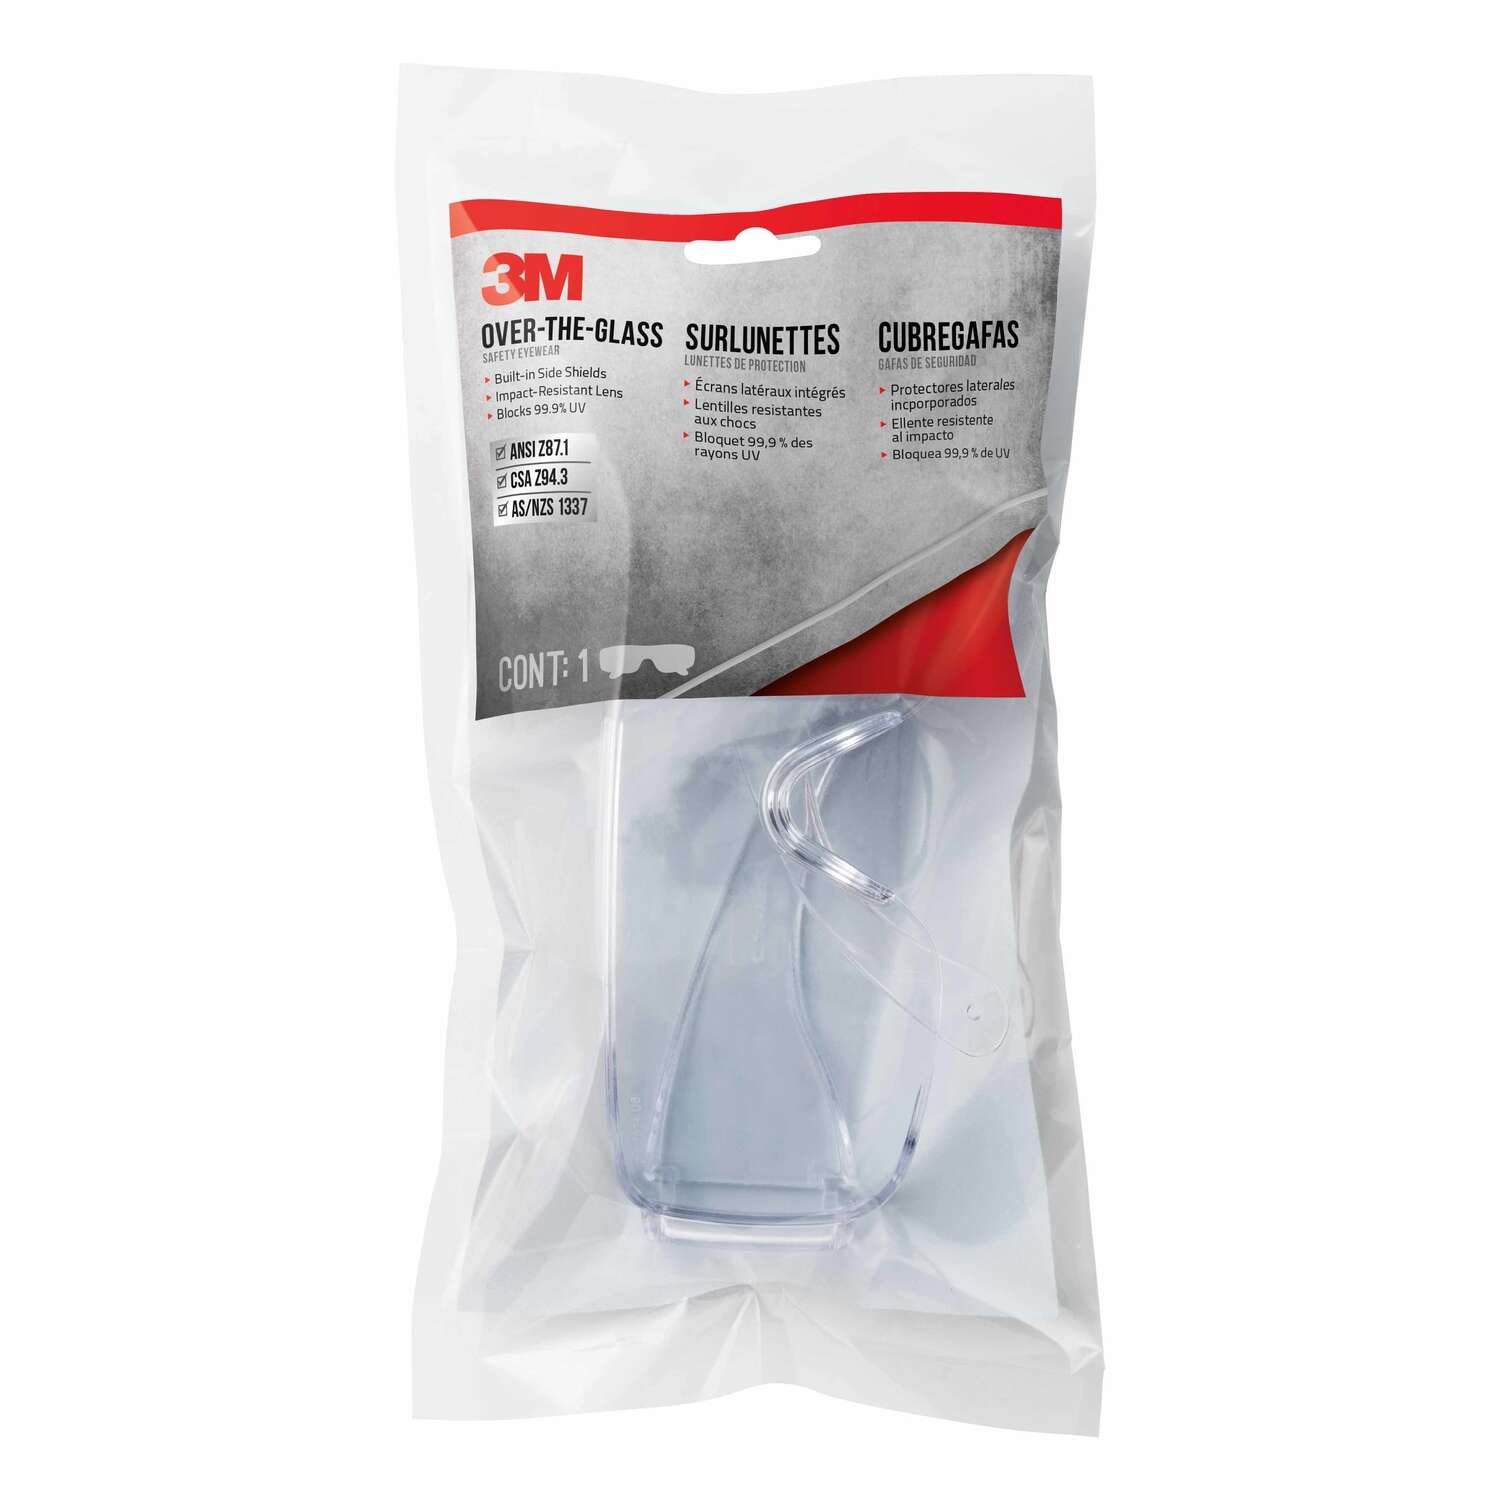 Select Home Depot Stores: 3M Over-the-Glass Safety Eyewear (Clear) $1.22 + Free Shipping